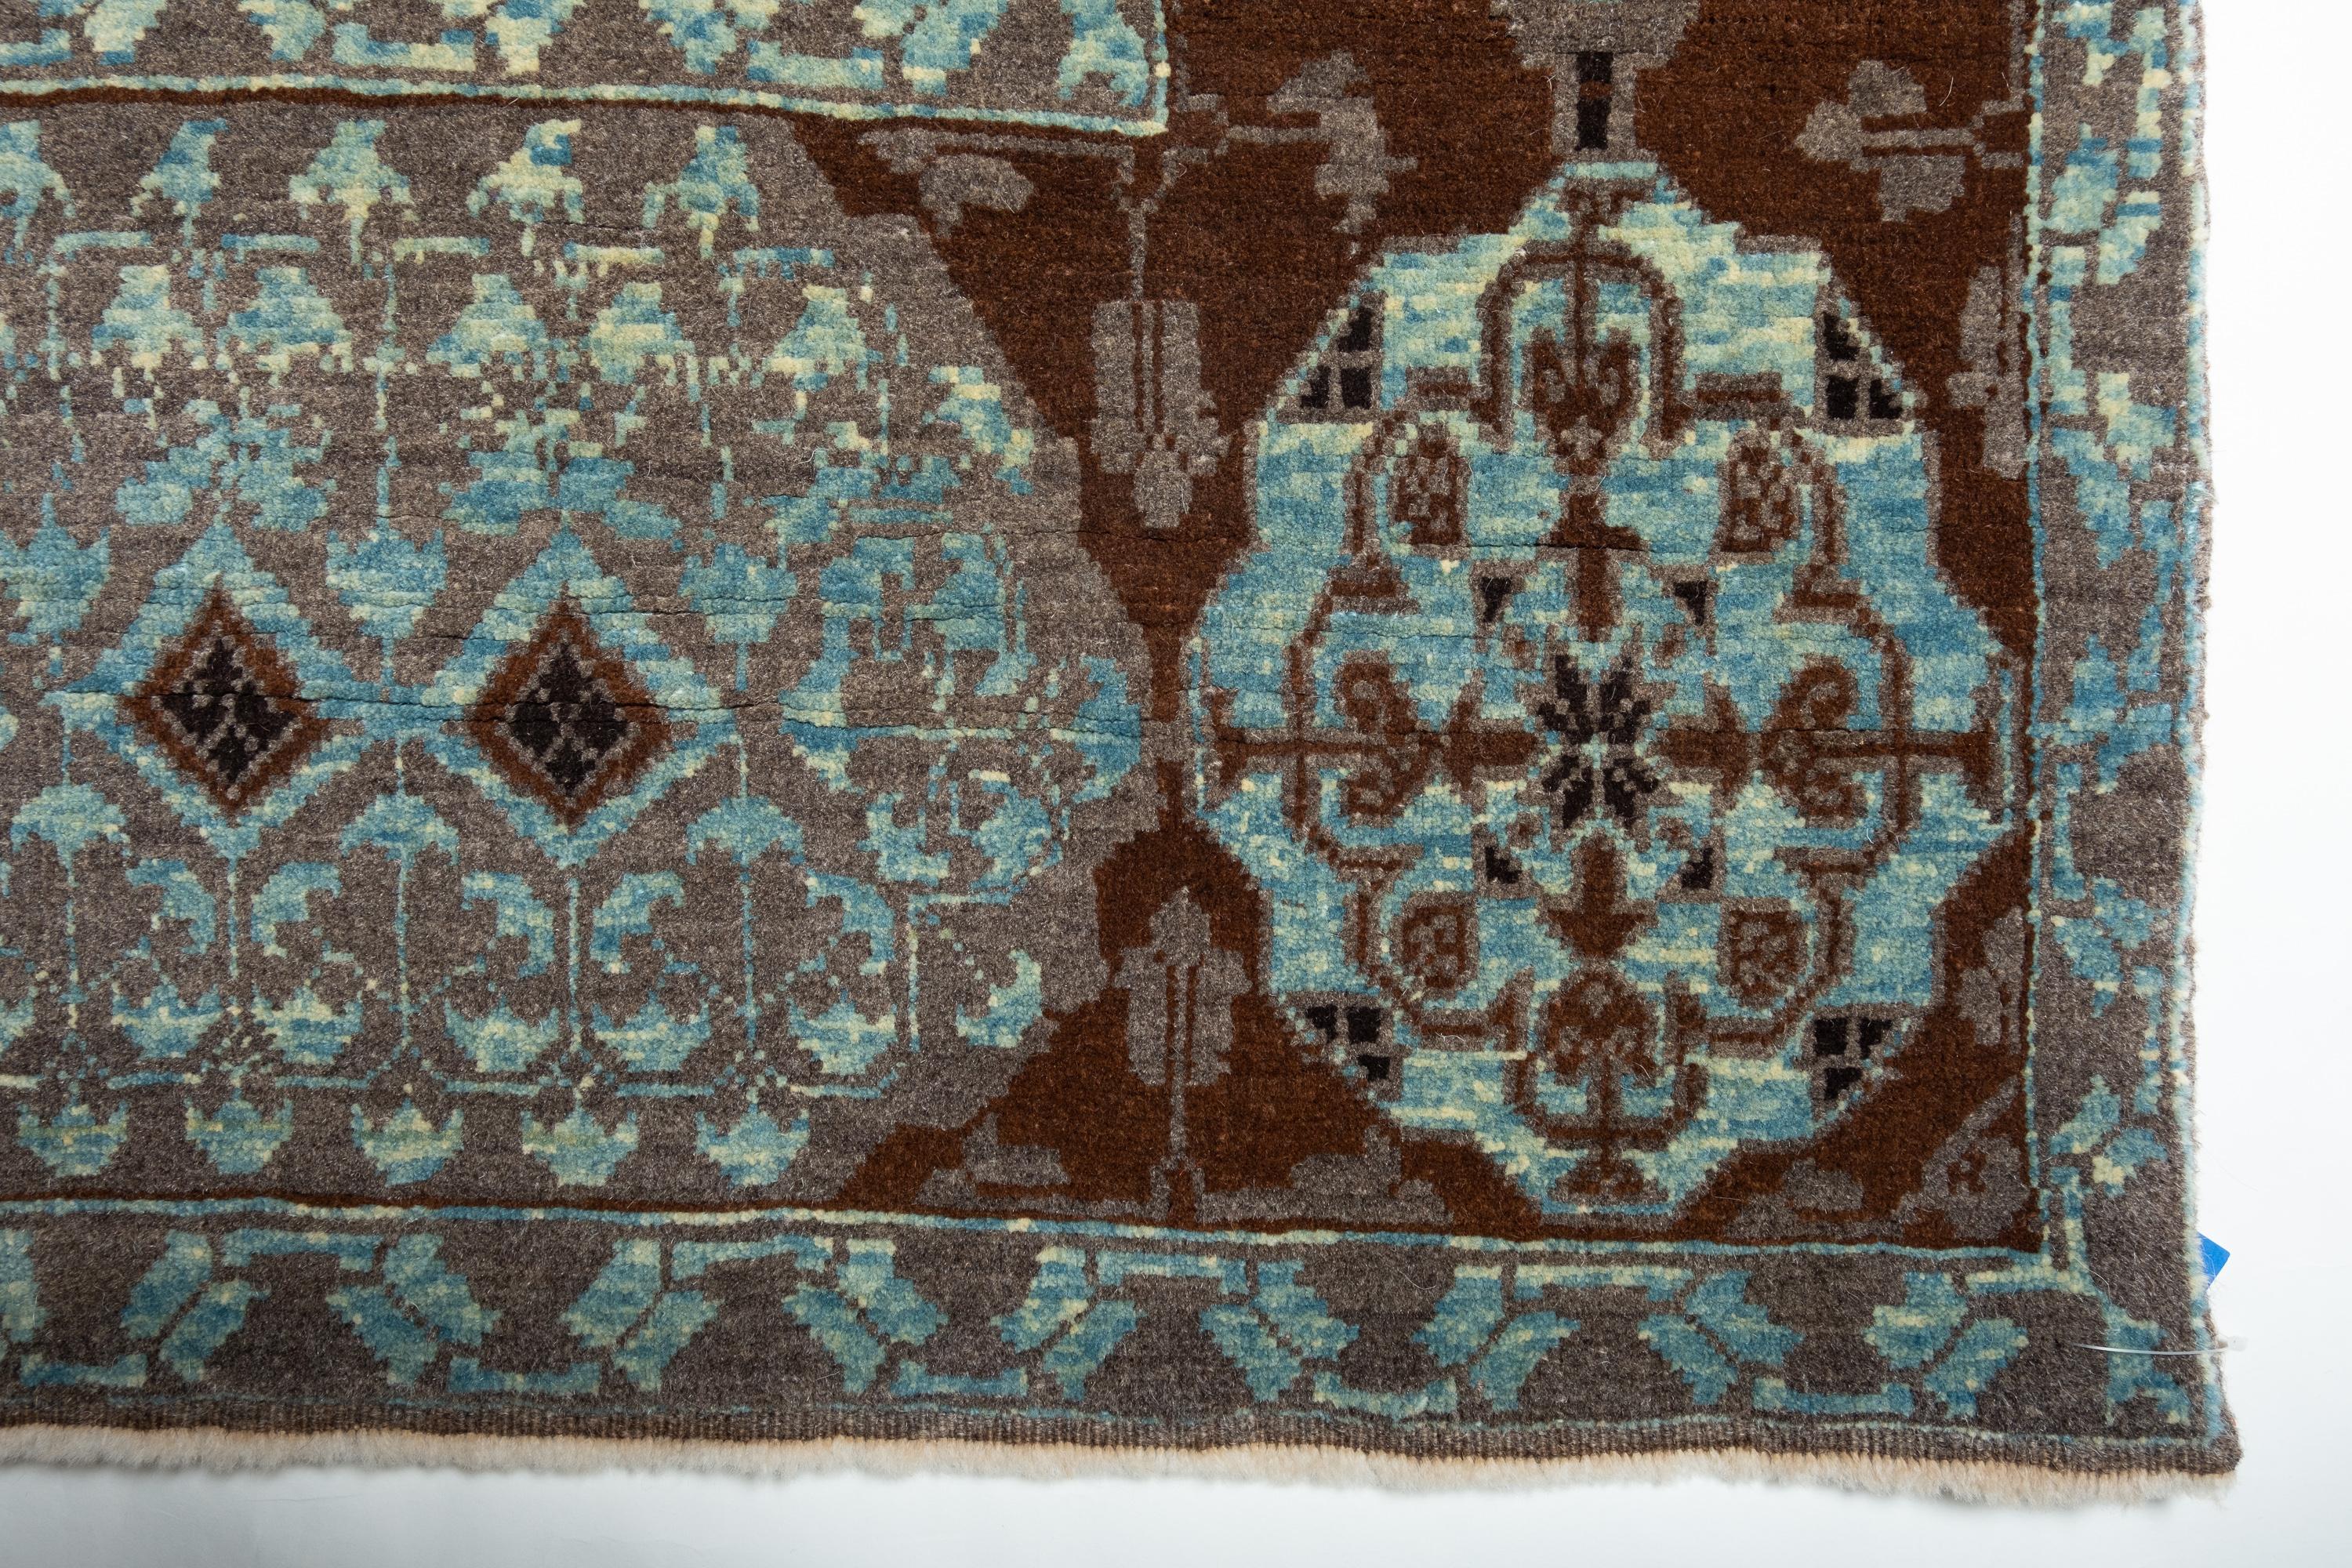 Turkish Ararat Rugs Mamluk Carpet with Cup Motif, Antique Revival Rug, Natural Dyed For Sale